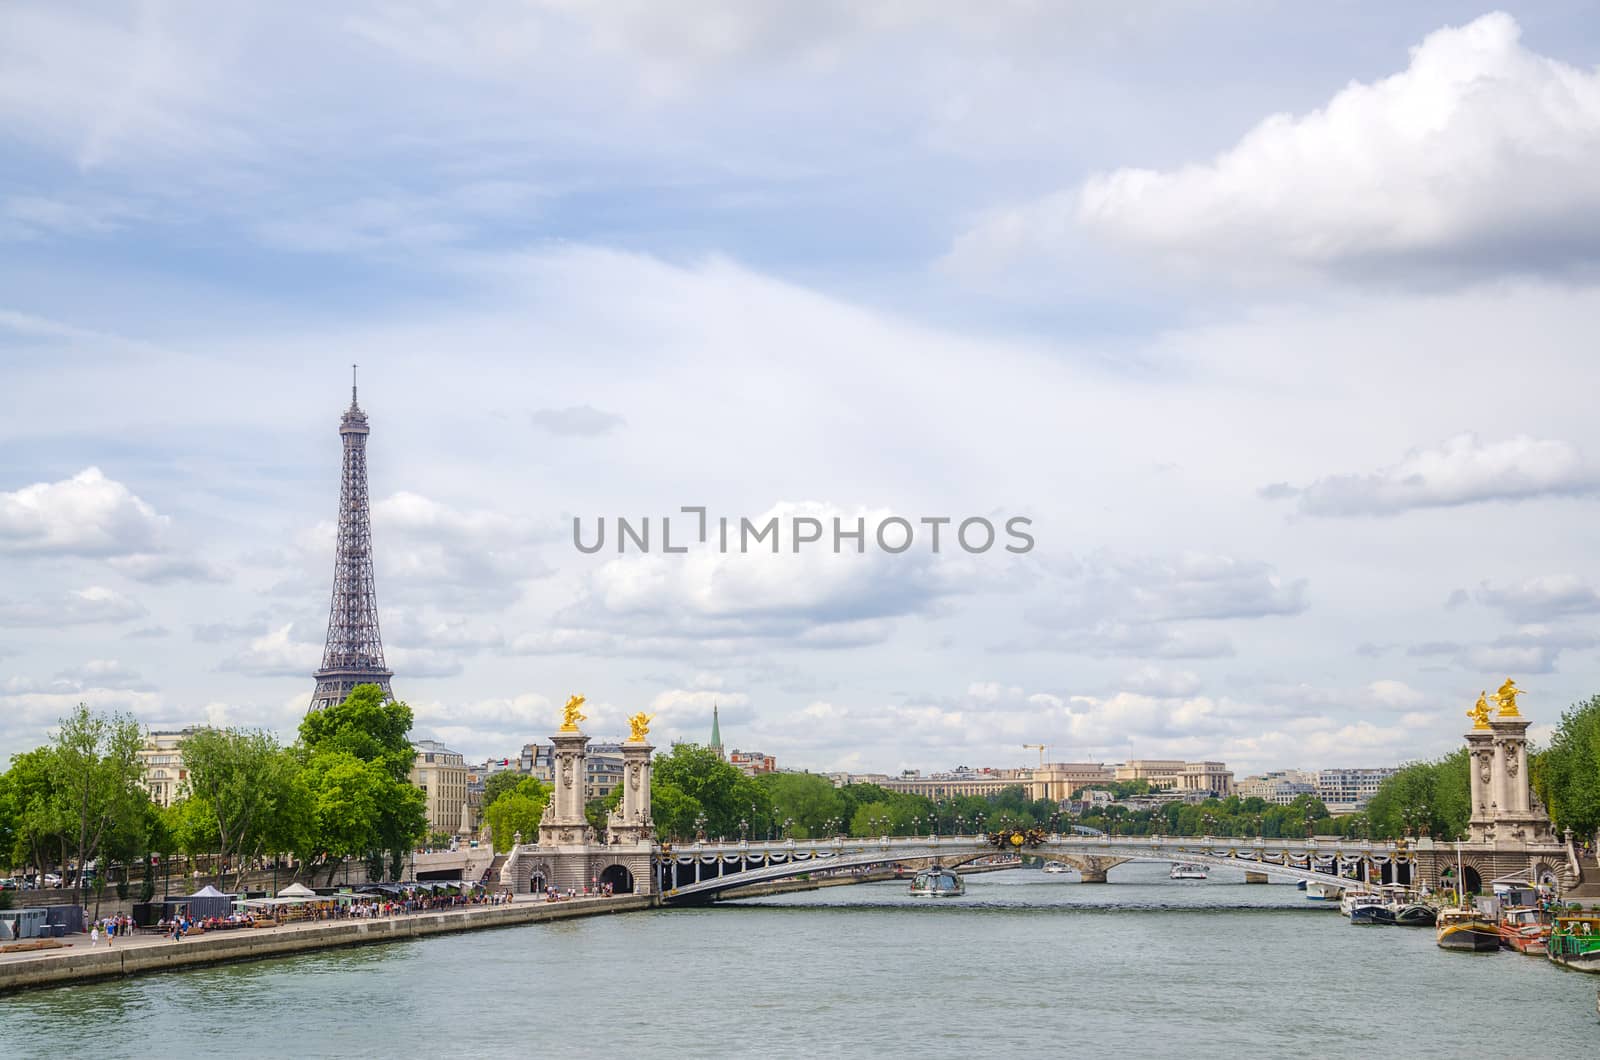 Paris with Eiffel tower by maisicon